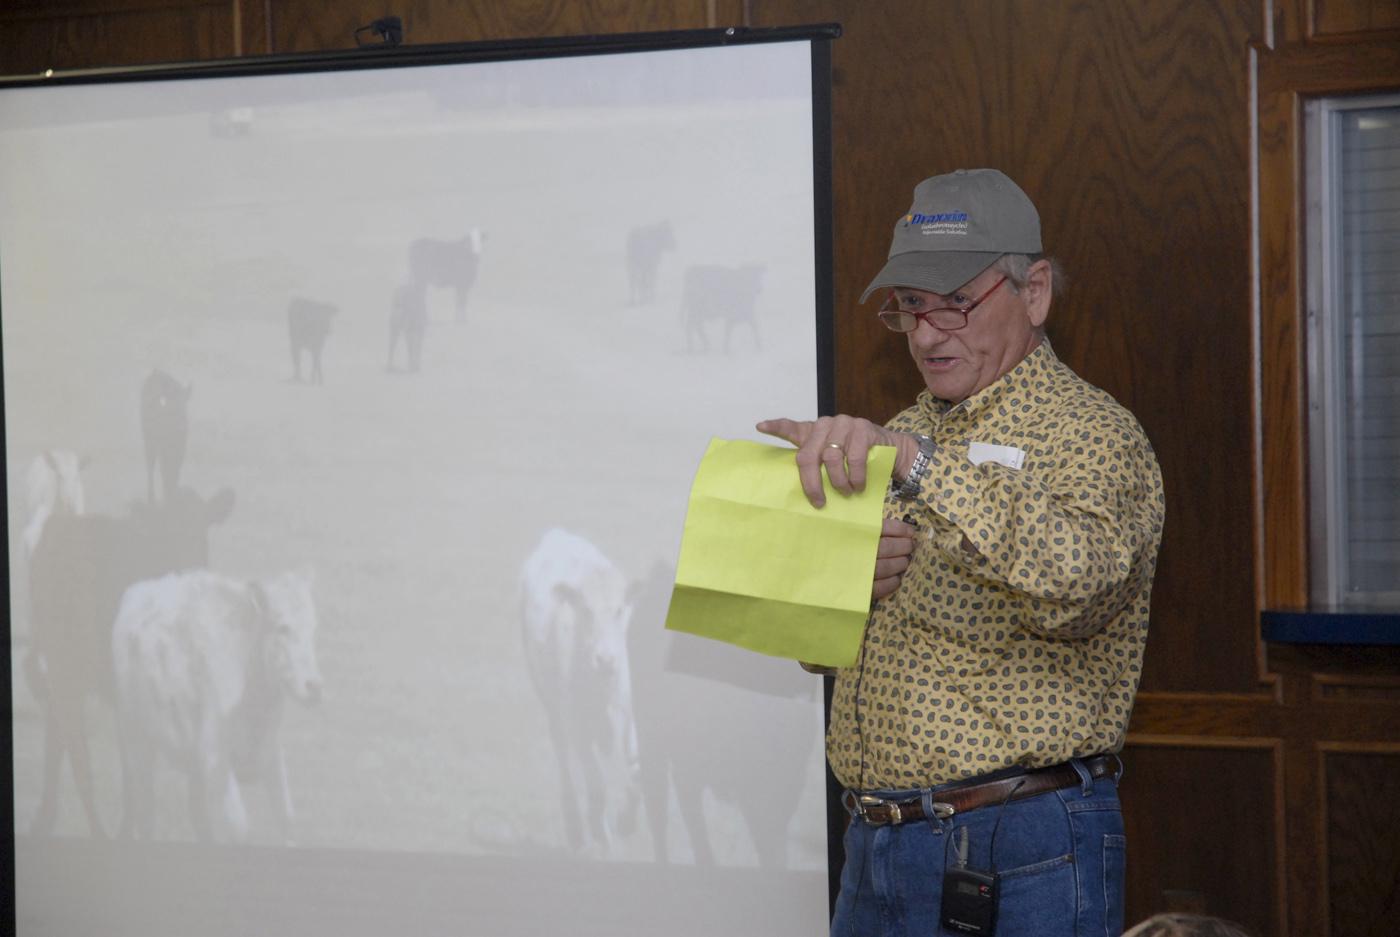 Ray Welch, owner of Winona Stockyards, serves as the auctioneer for the Cattlemen's Exchange and Homeplace Producer Sale held in April. Buyers see video segments and read descriptions of cattle lots as they bid on the animals. More than 2,000 cattle were sold in less than an hour with total receipts approaching $1.9 million. (Photo by Linda Breazeale)